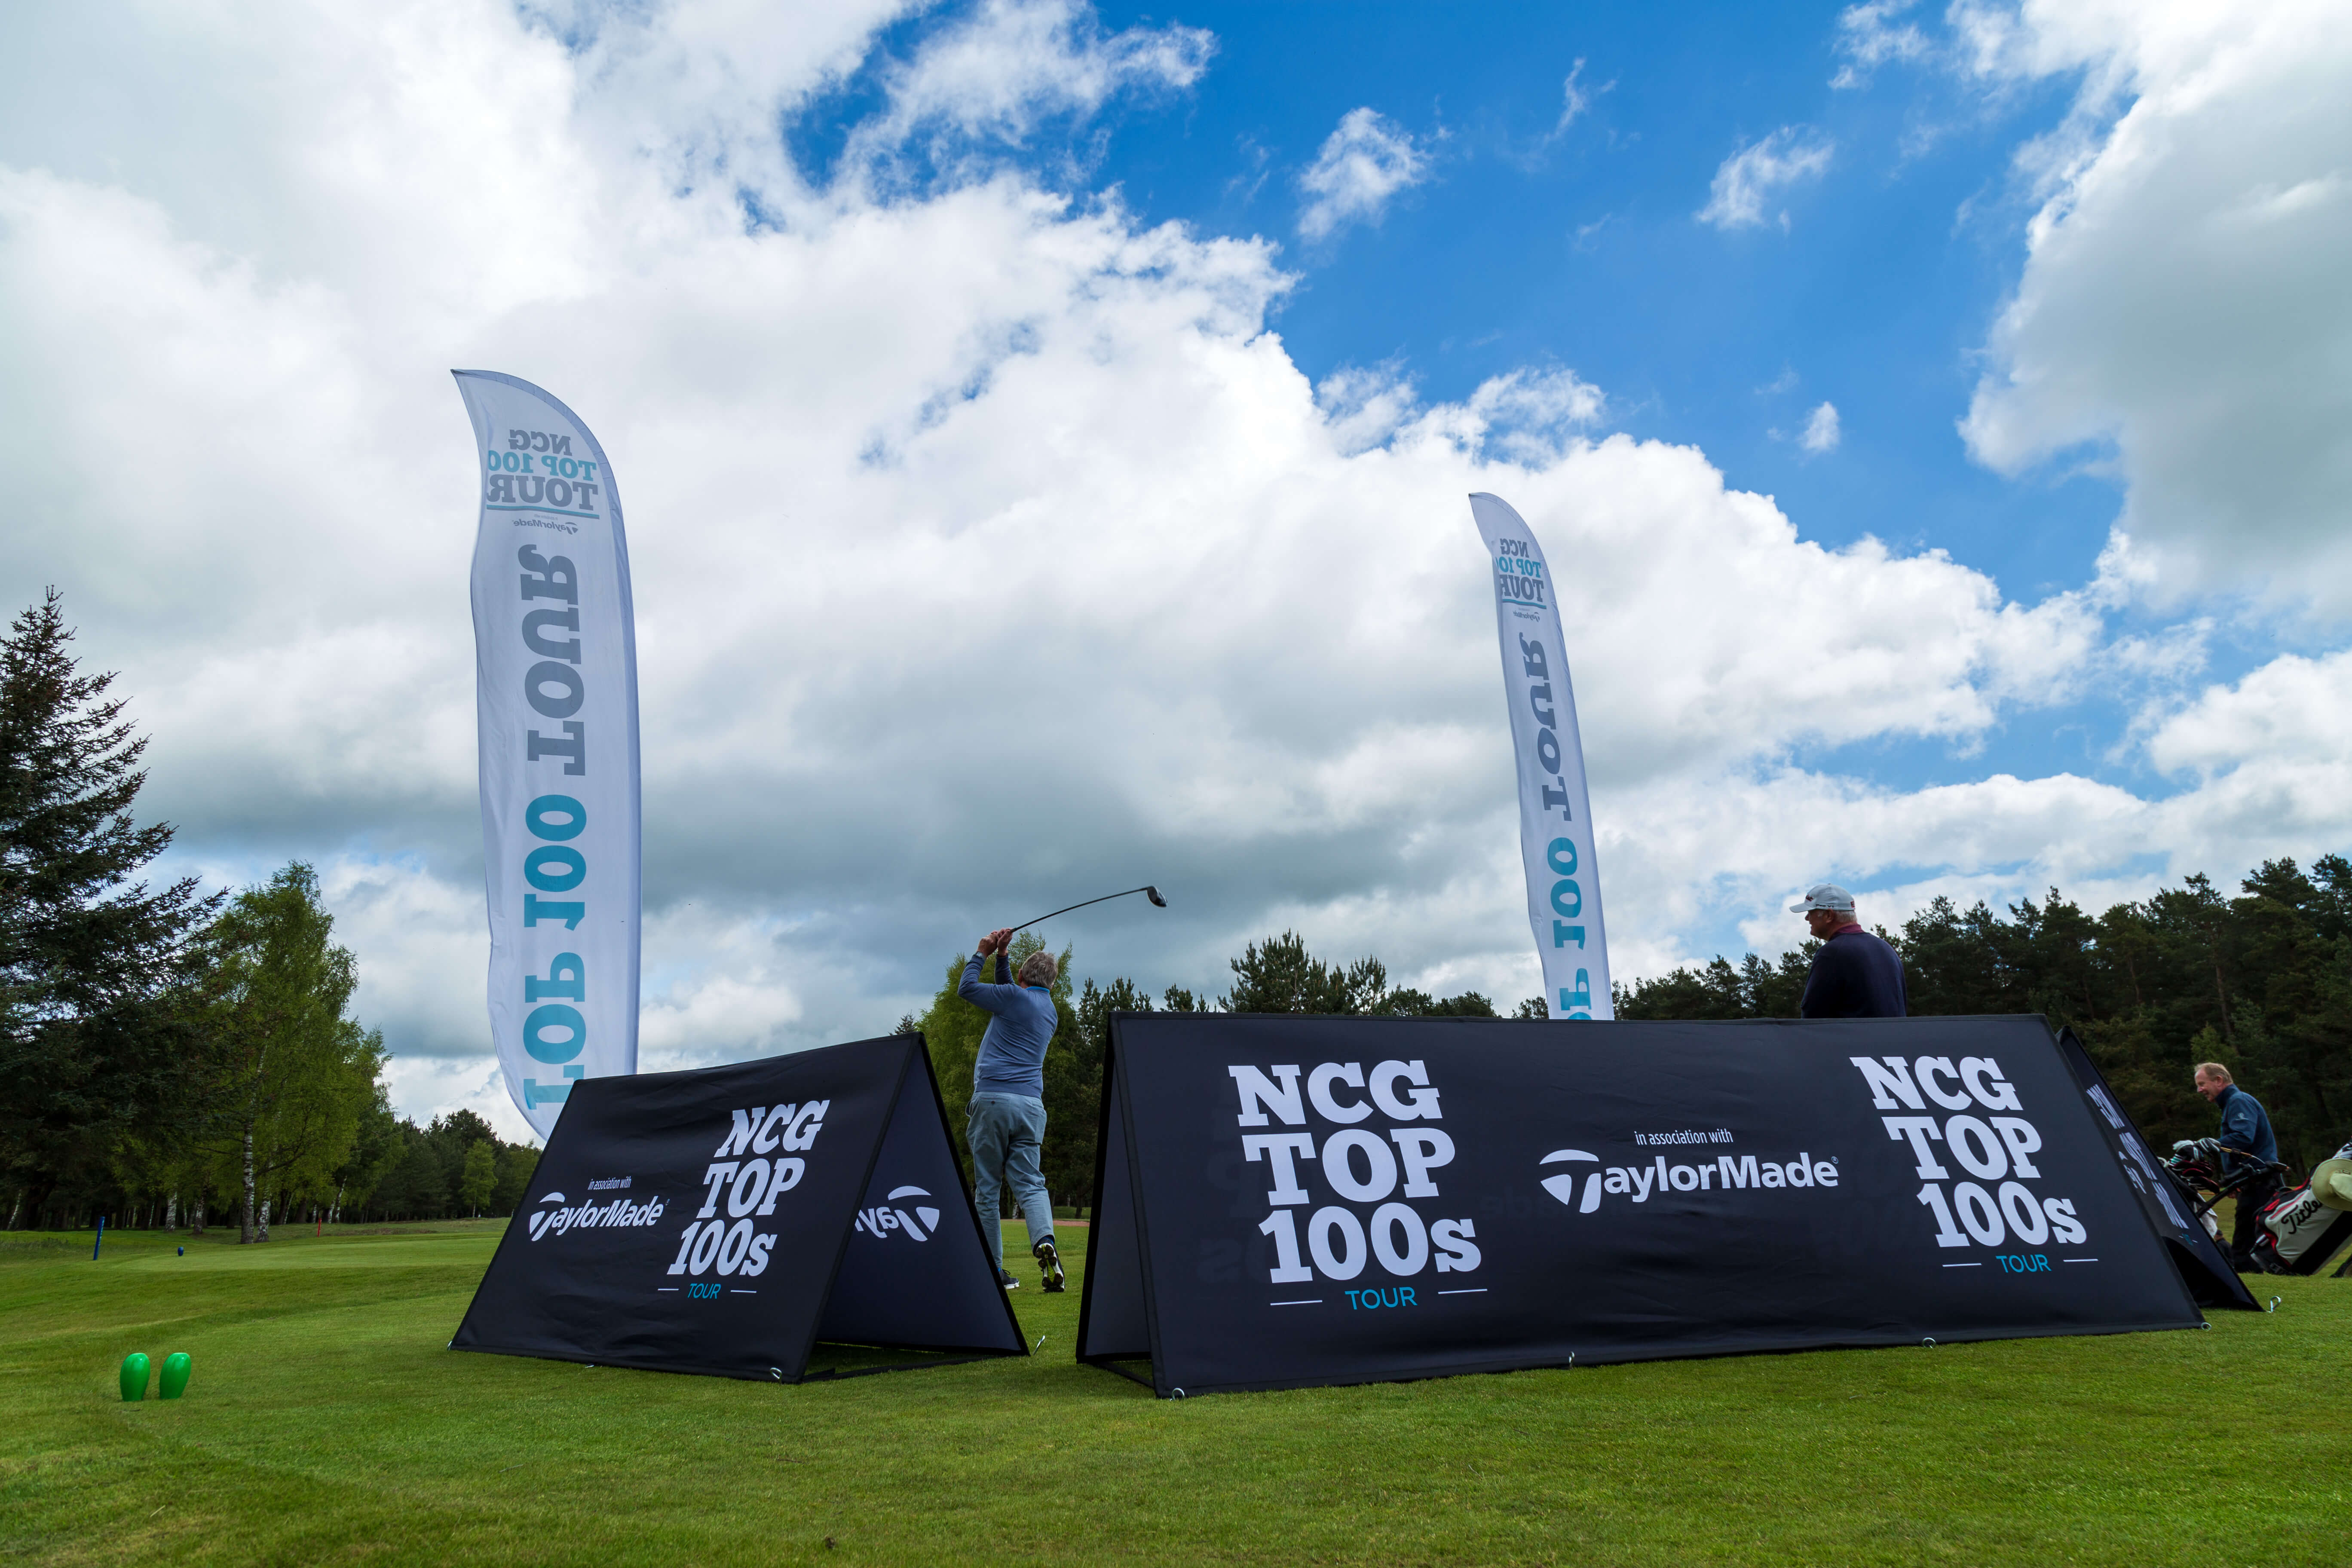 WIN! Incredible prizes with the NCG Top 100s Tour